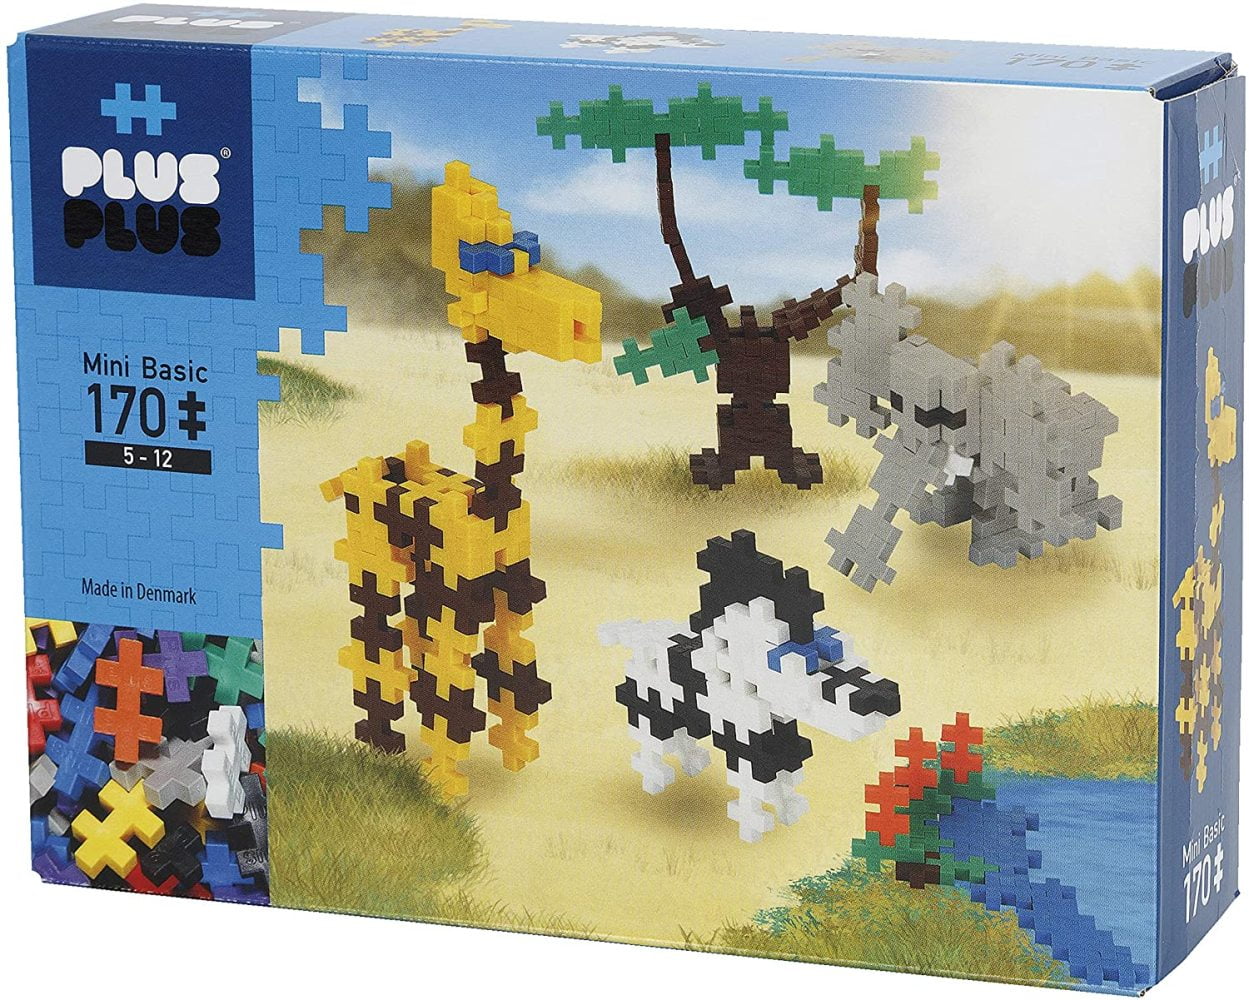 Puzzle Piece-Shaped Building Toy PLUS PLUS 170 Piece JEWELRY Instructed Set 